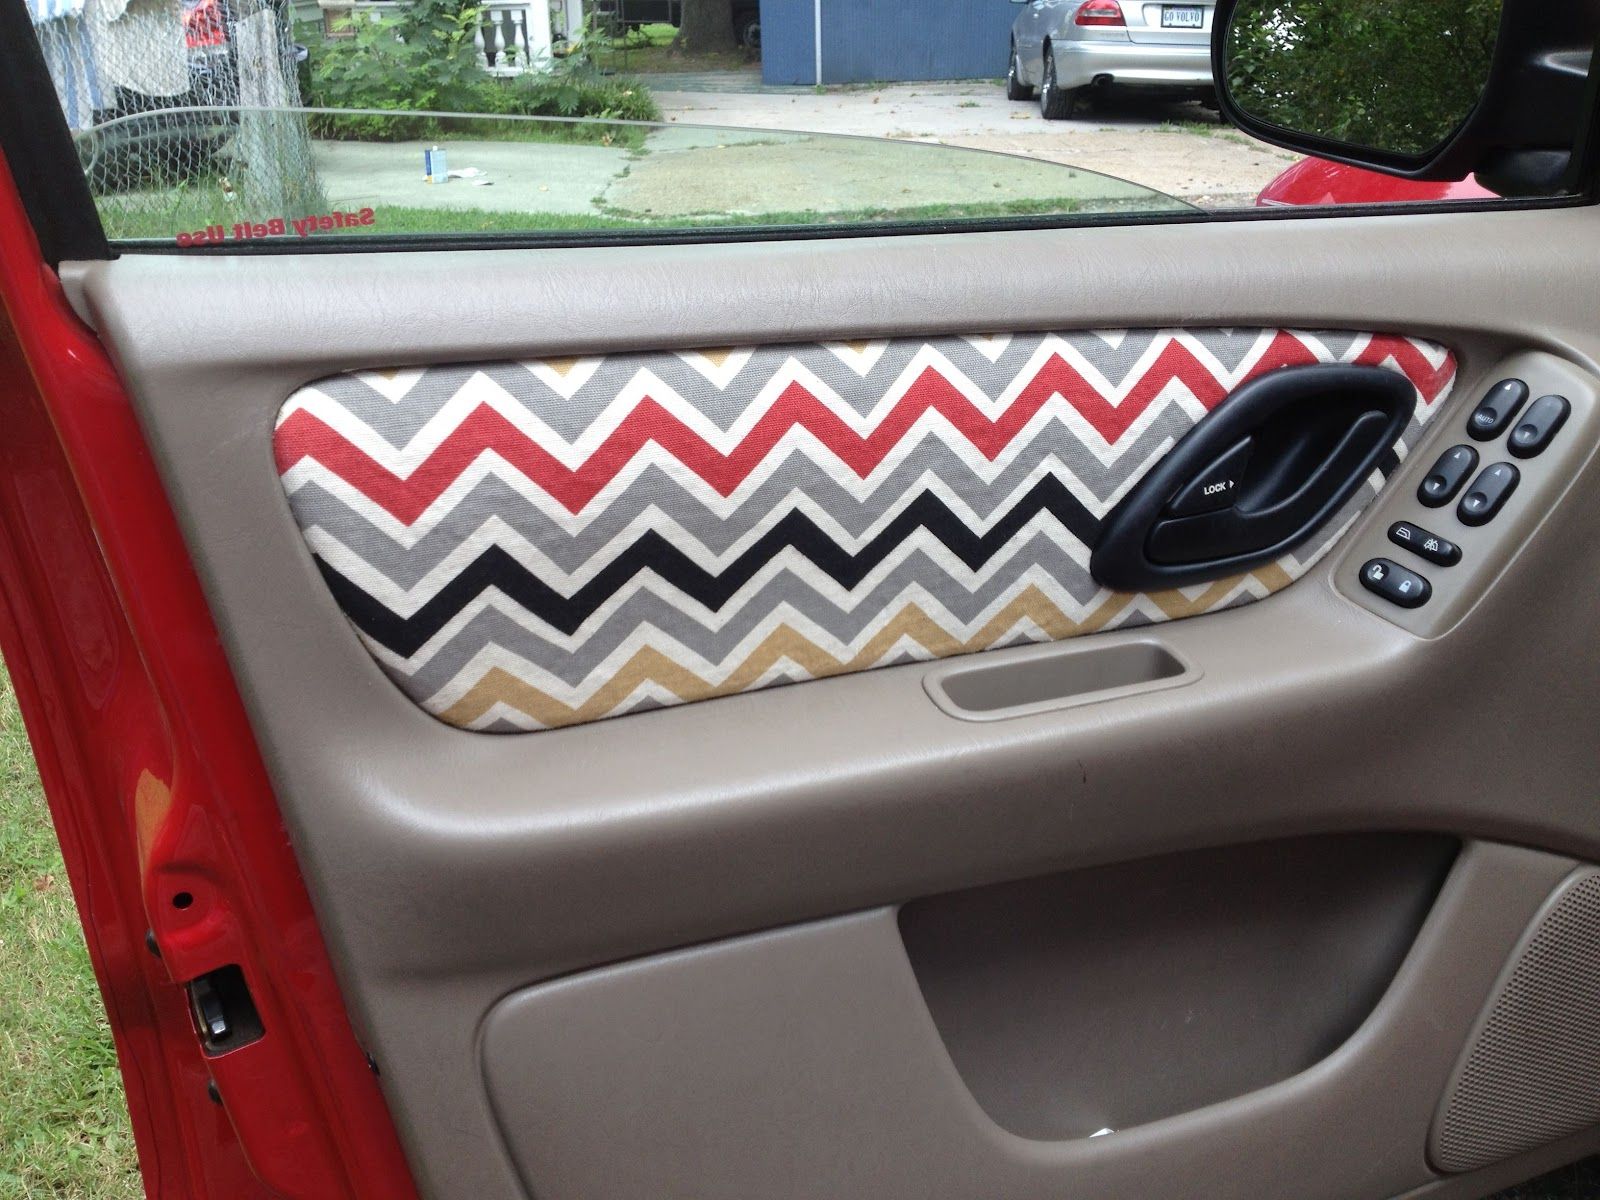 DIY cute fabric to cover worn-out, faded, or melted standard fabric in your car.